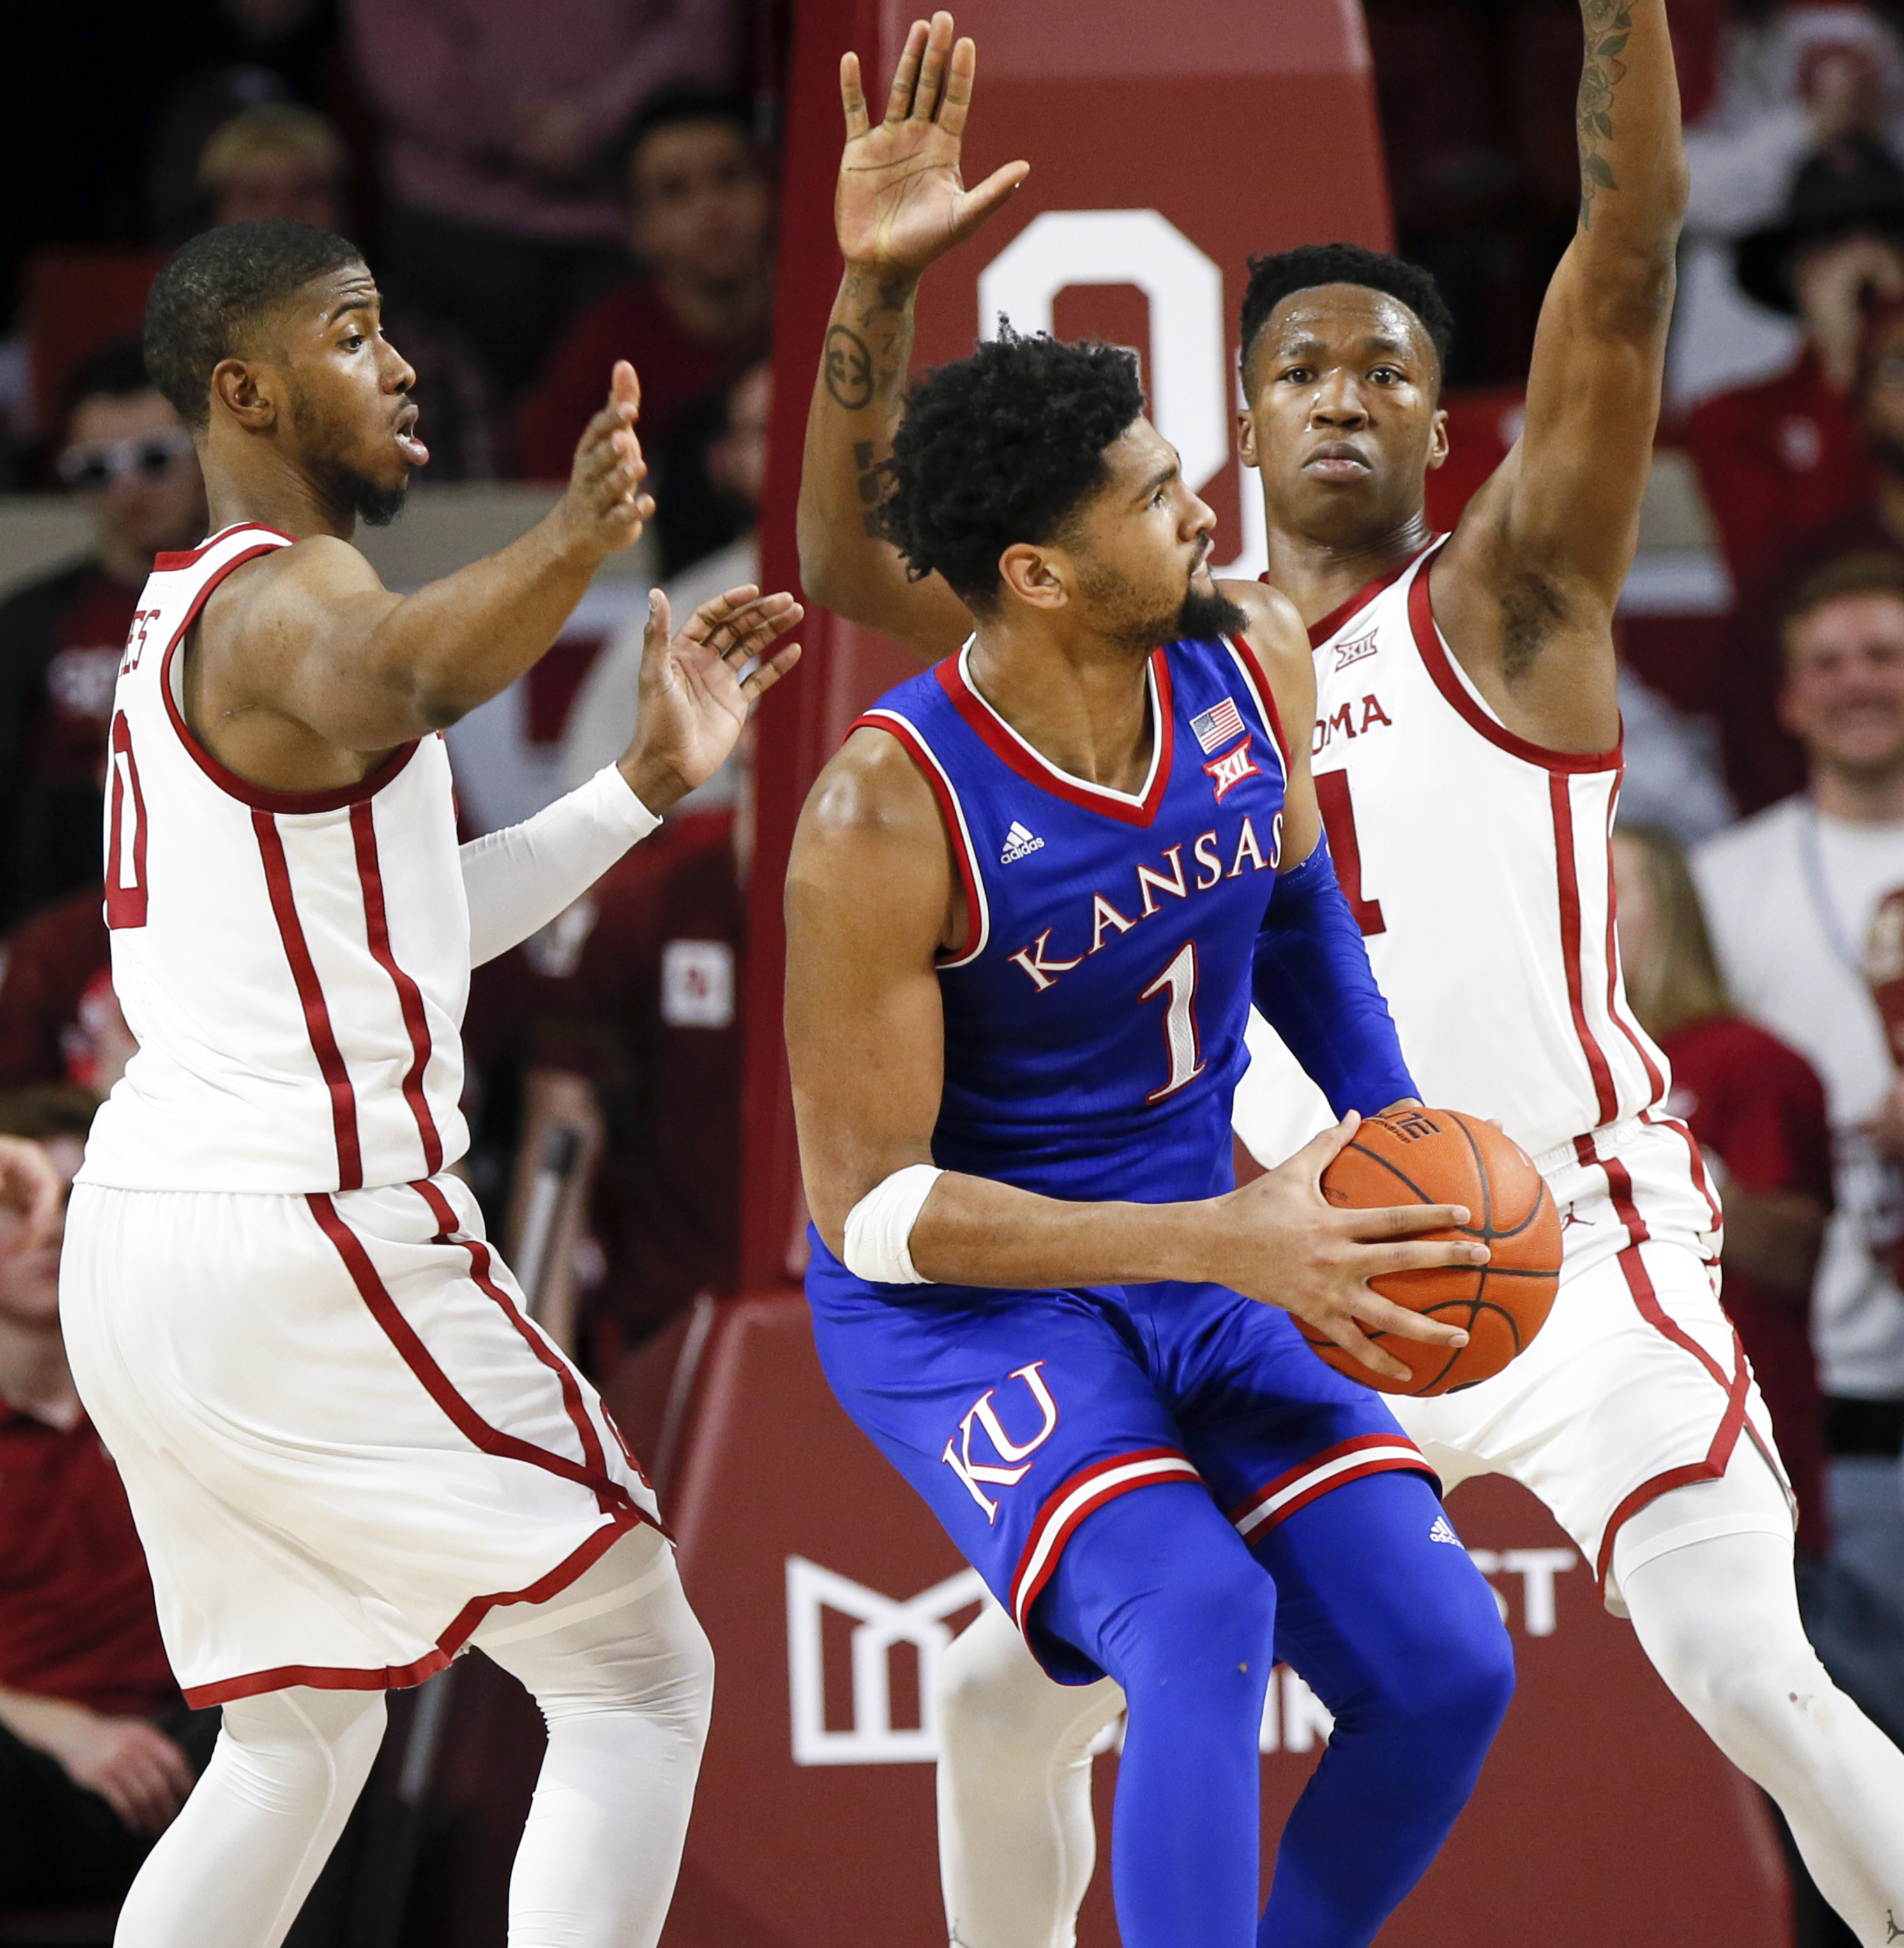 Kansas’ streak of 14 straight Big 12 titles ends with thud